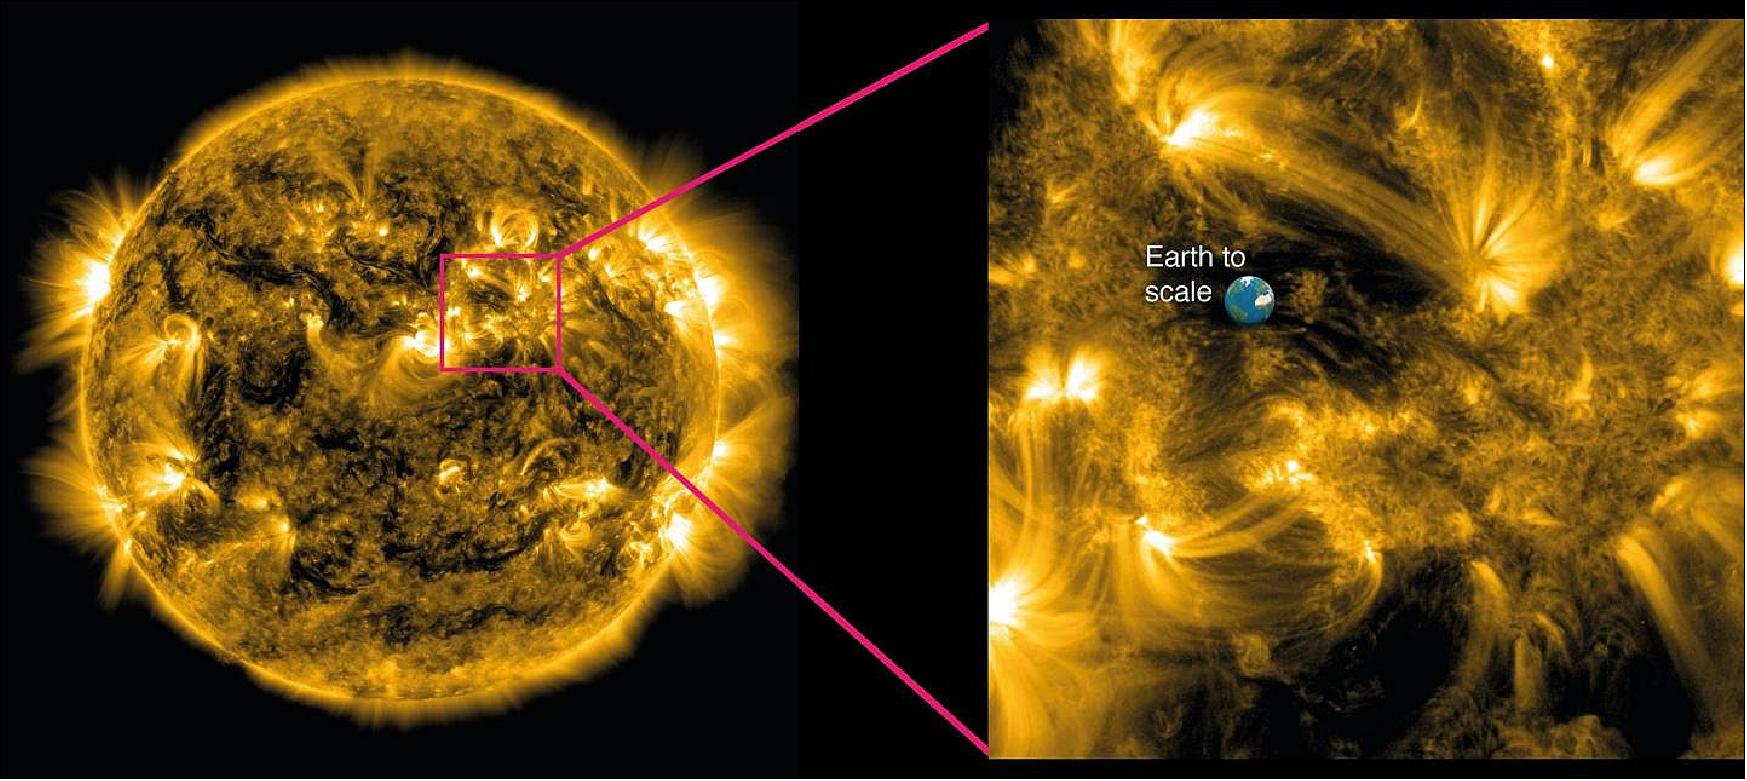 Figure 17: Left: An image of our sun taken by NASA's SDO, showing million degree plasma being channeled into loop-like shapes by the immense magnetic fields. Right: A zoom-in of the highly magnetic region of the sun's corona studied by David Jess and colleagues from Queen's University Belfast, Northern Ireland (image credit: Queen's University Belfast)